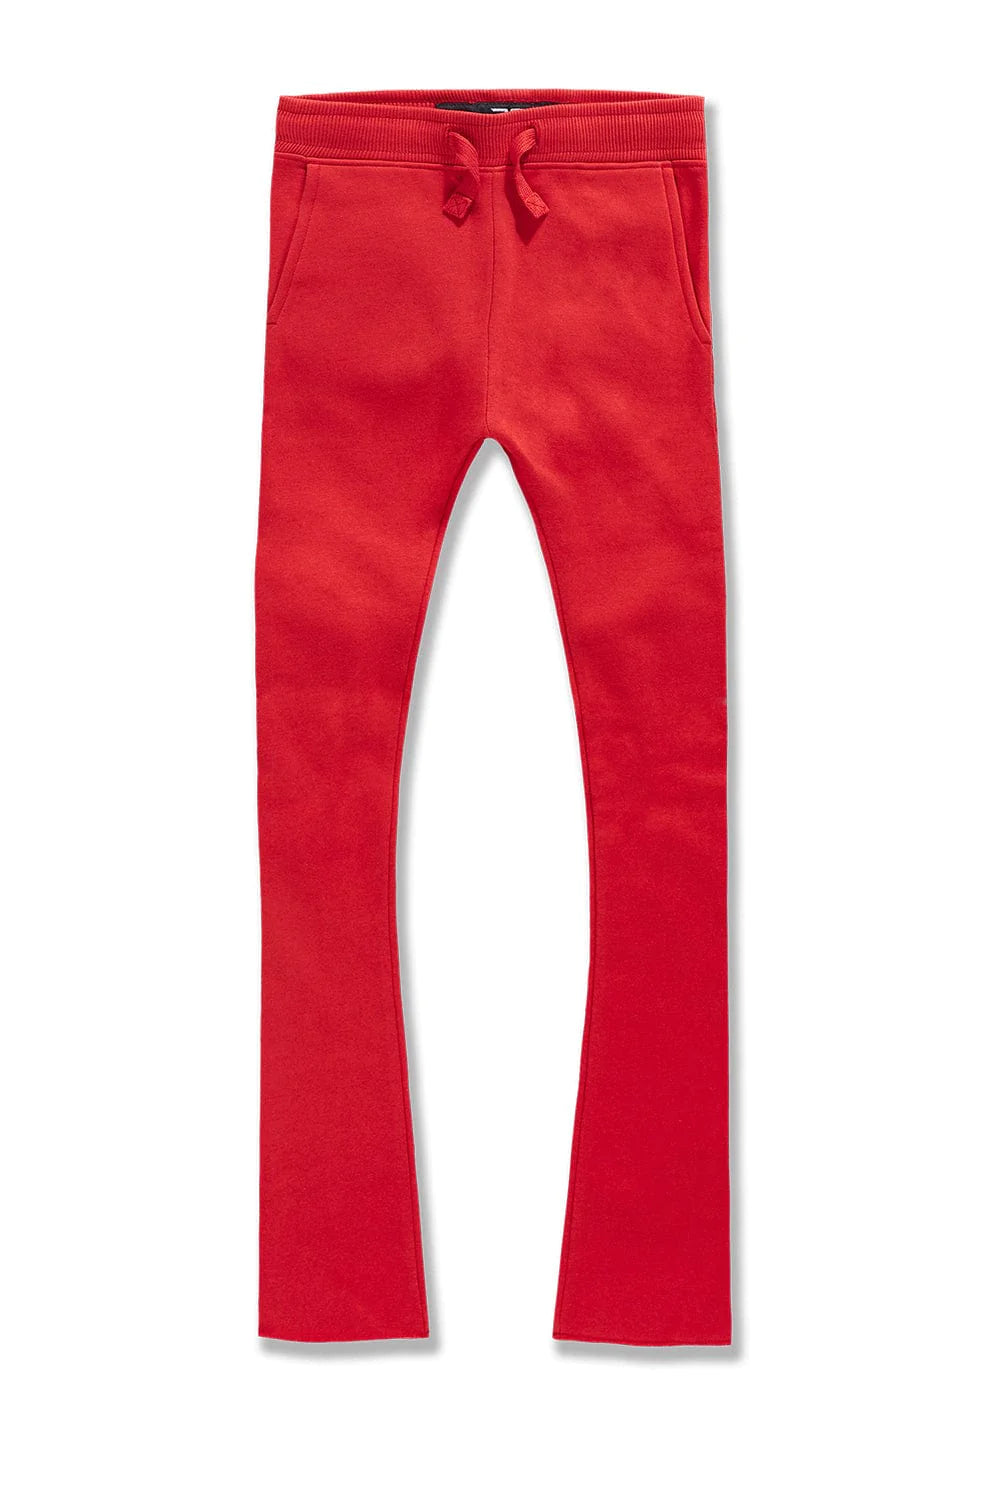 Kids Uptown Stacked Sweatpants - Red